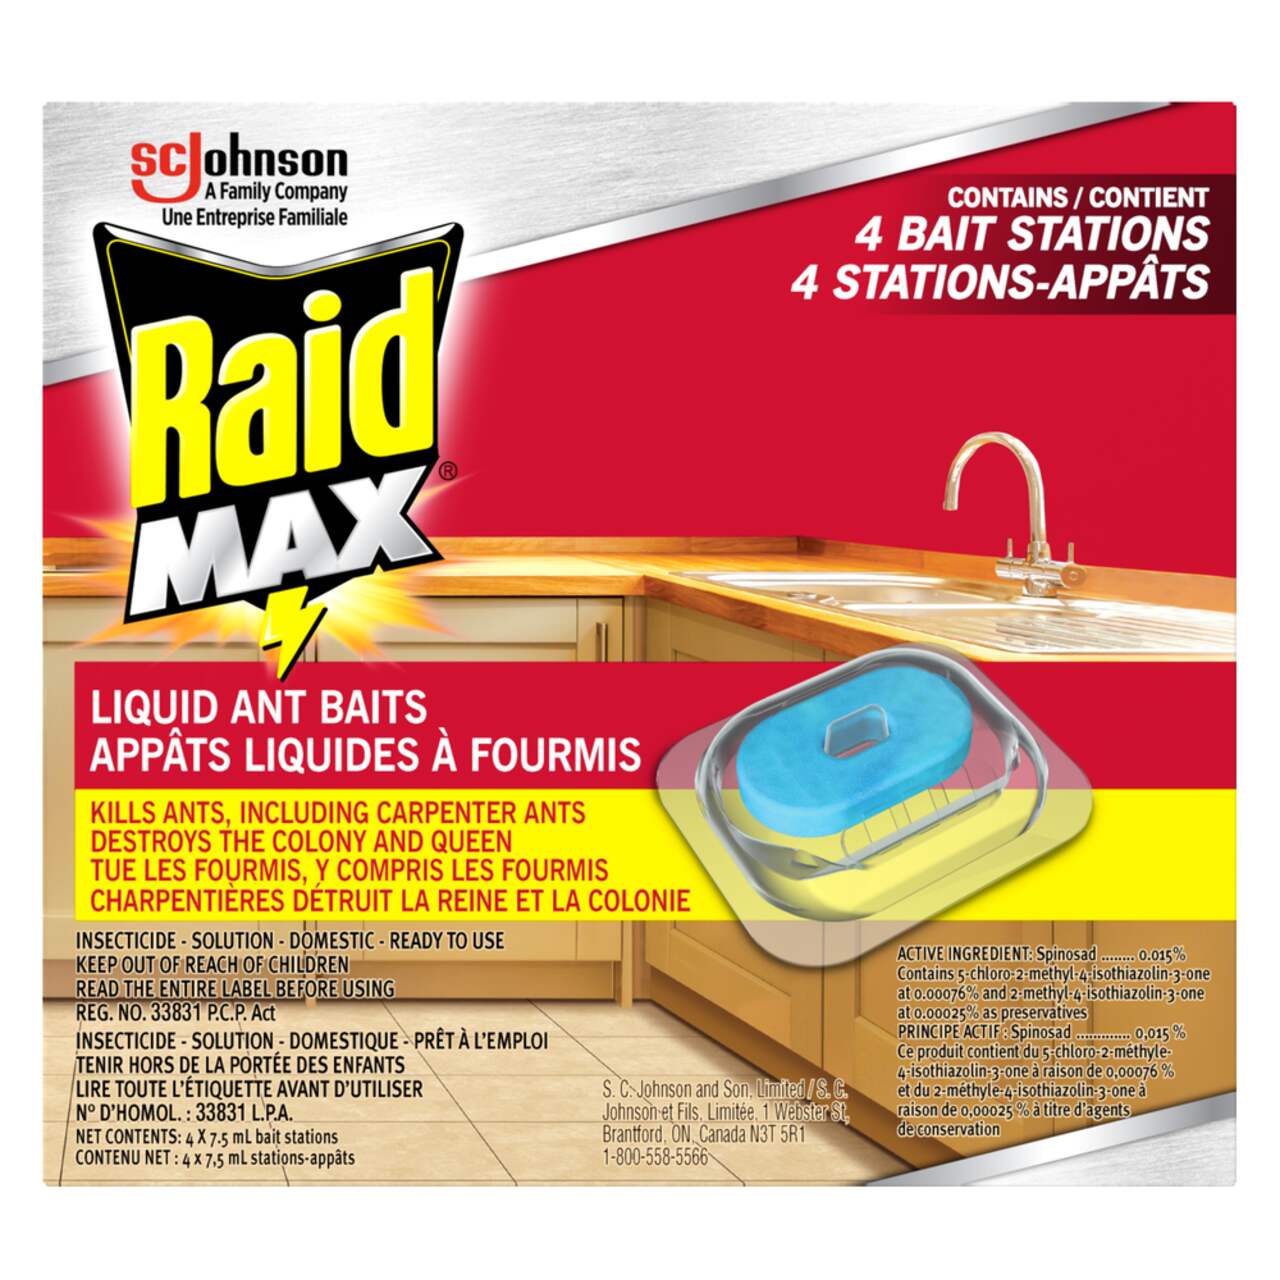 https://media-www.canadiantire.ca/product/seasonal-gardening/gardening/weed-insect-rodent-control/1591703/raid-ant-baits-4-pack-e5b6e3d1-81a3-4d20-a53f-07d2dd7e6897.png?imdensity=1&imwidth=640&impolicy=mZoom